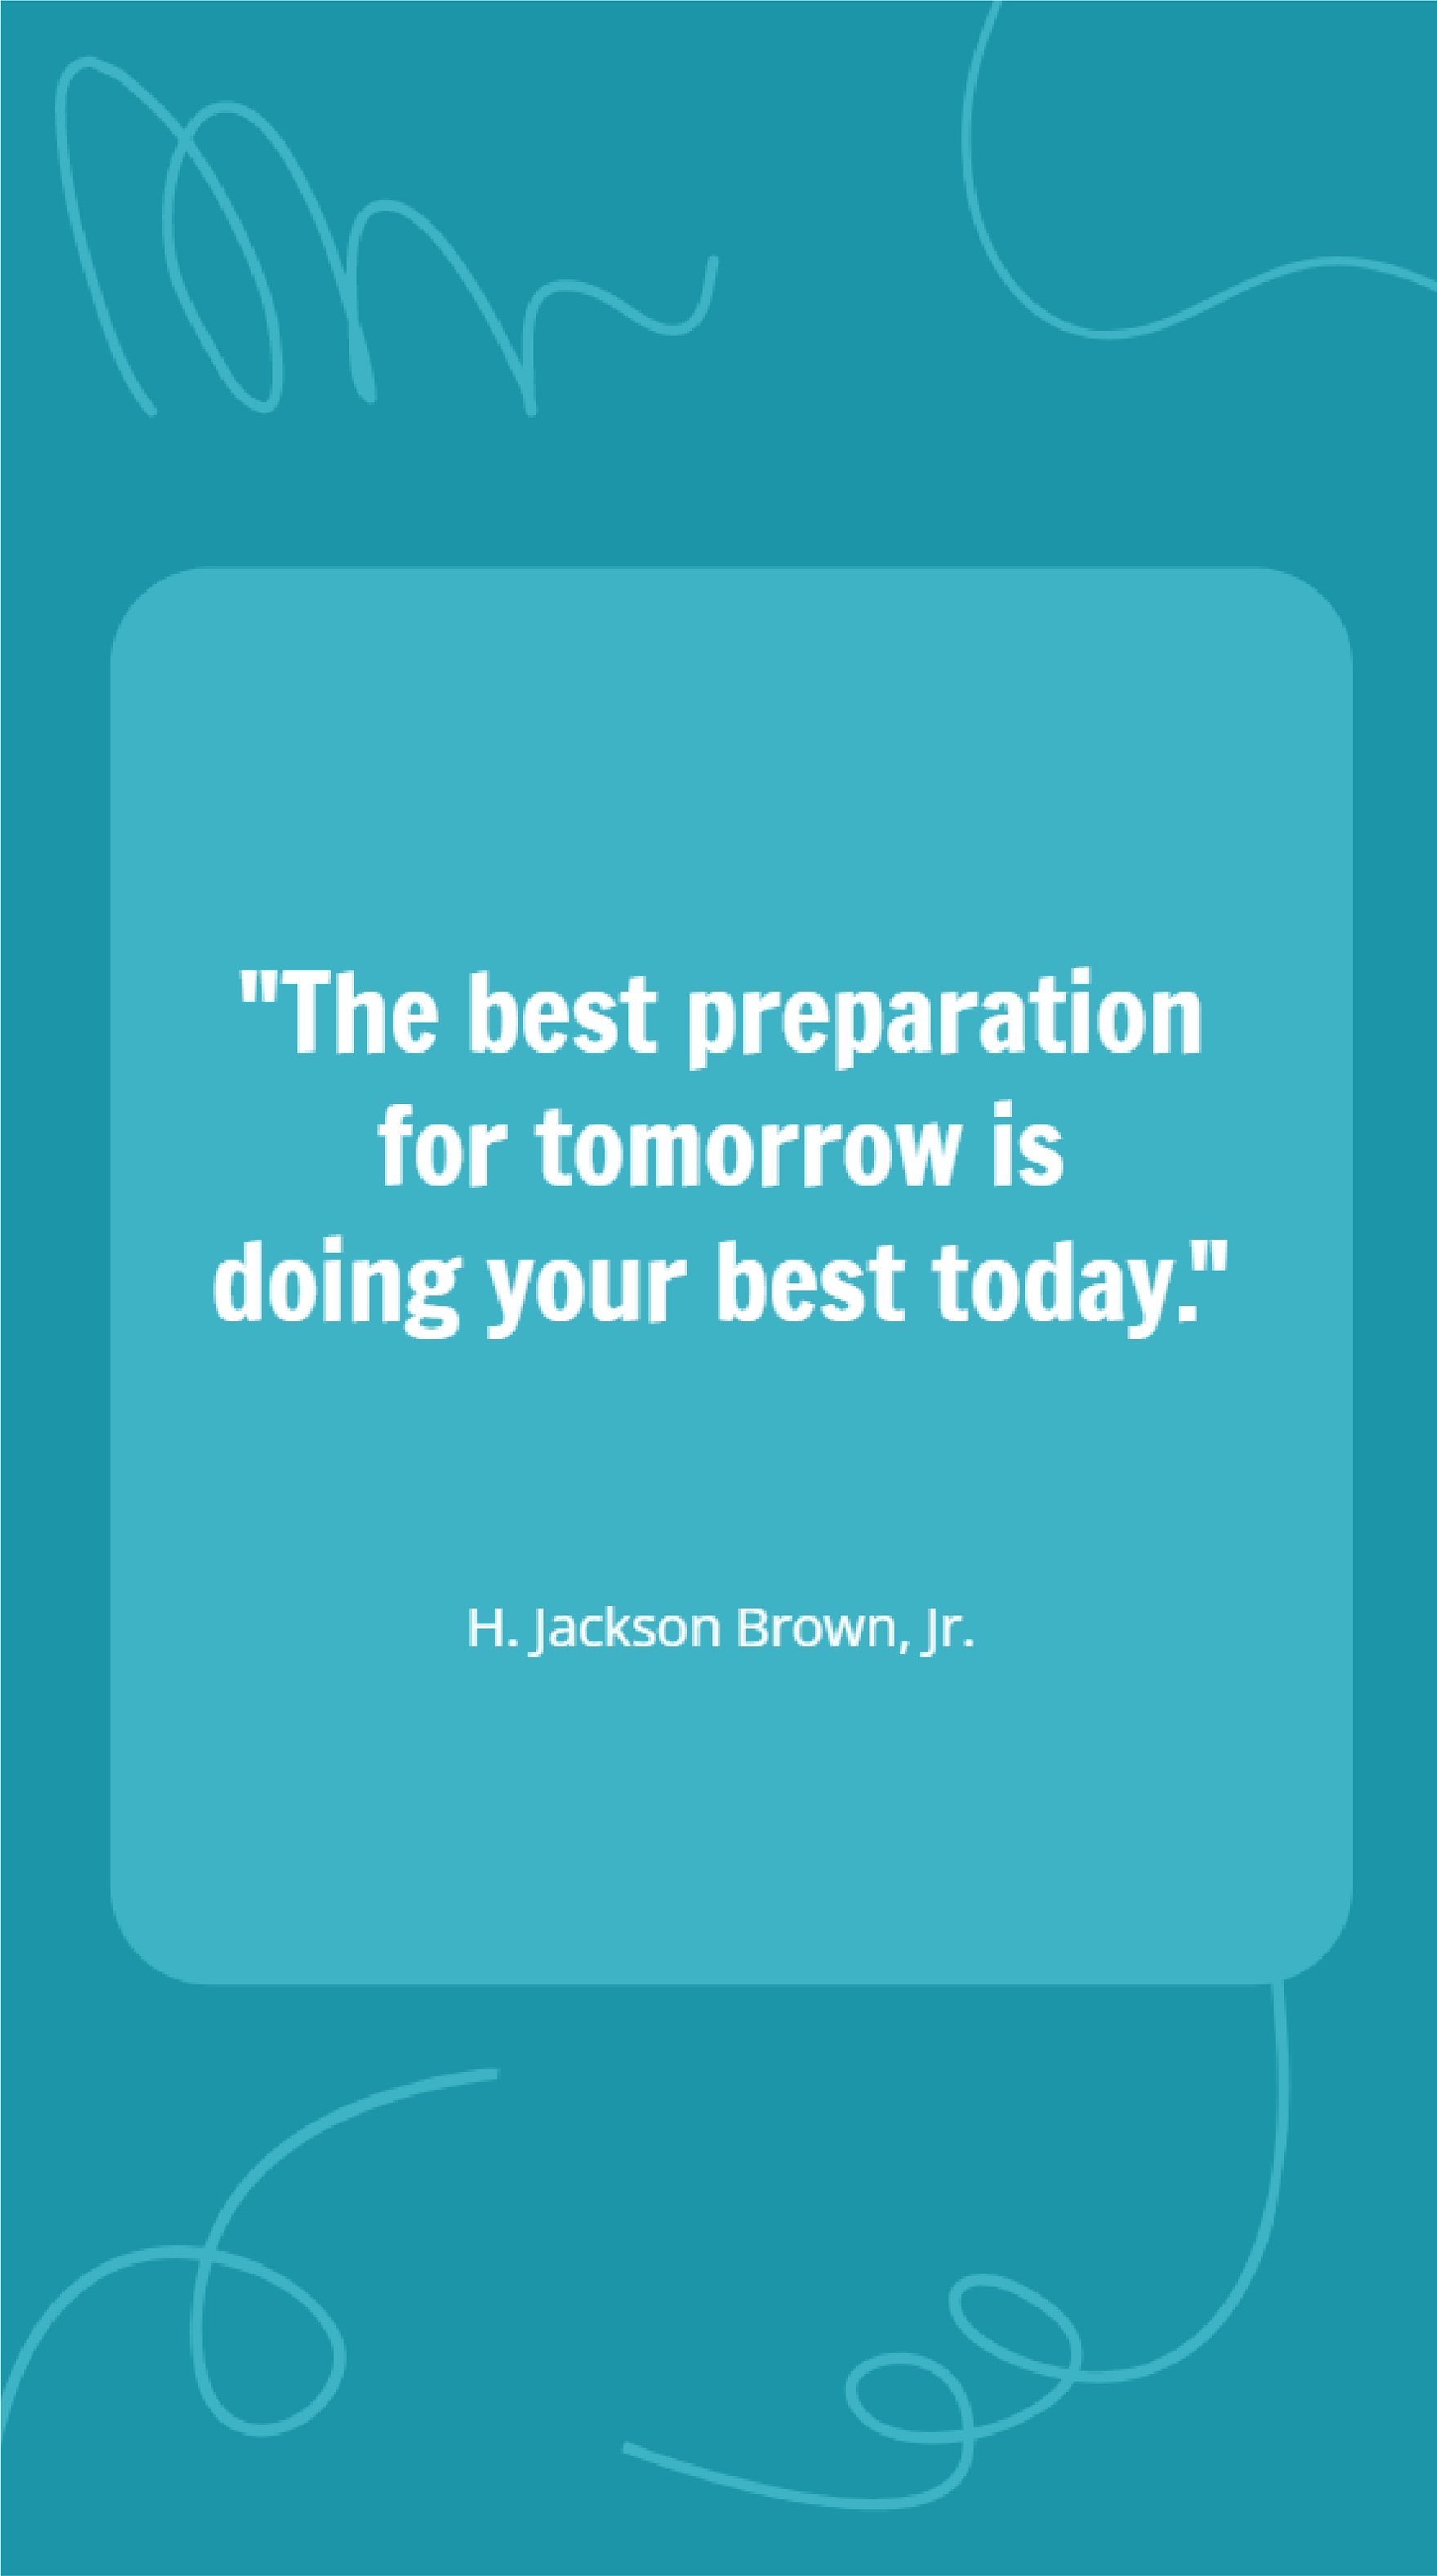 H. Jackson Brown, Jr. - The best preparation for tomorrow is doing your best today